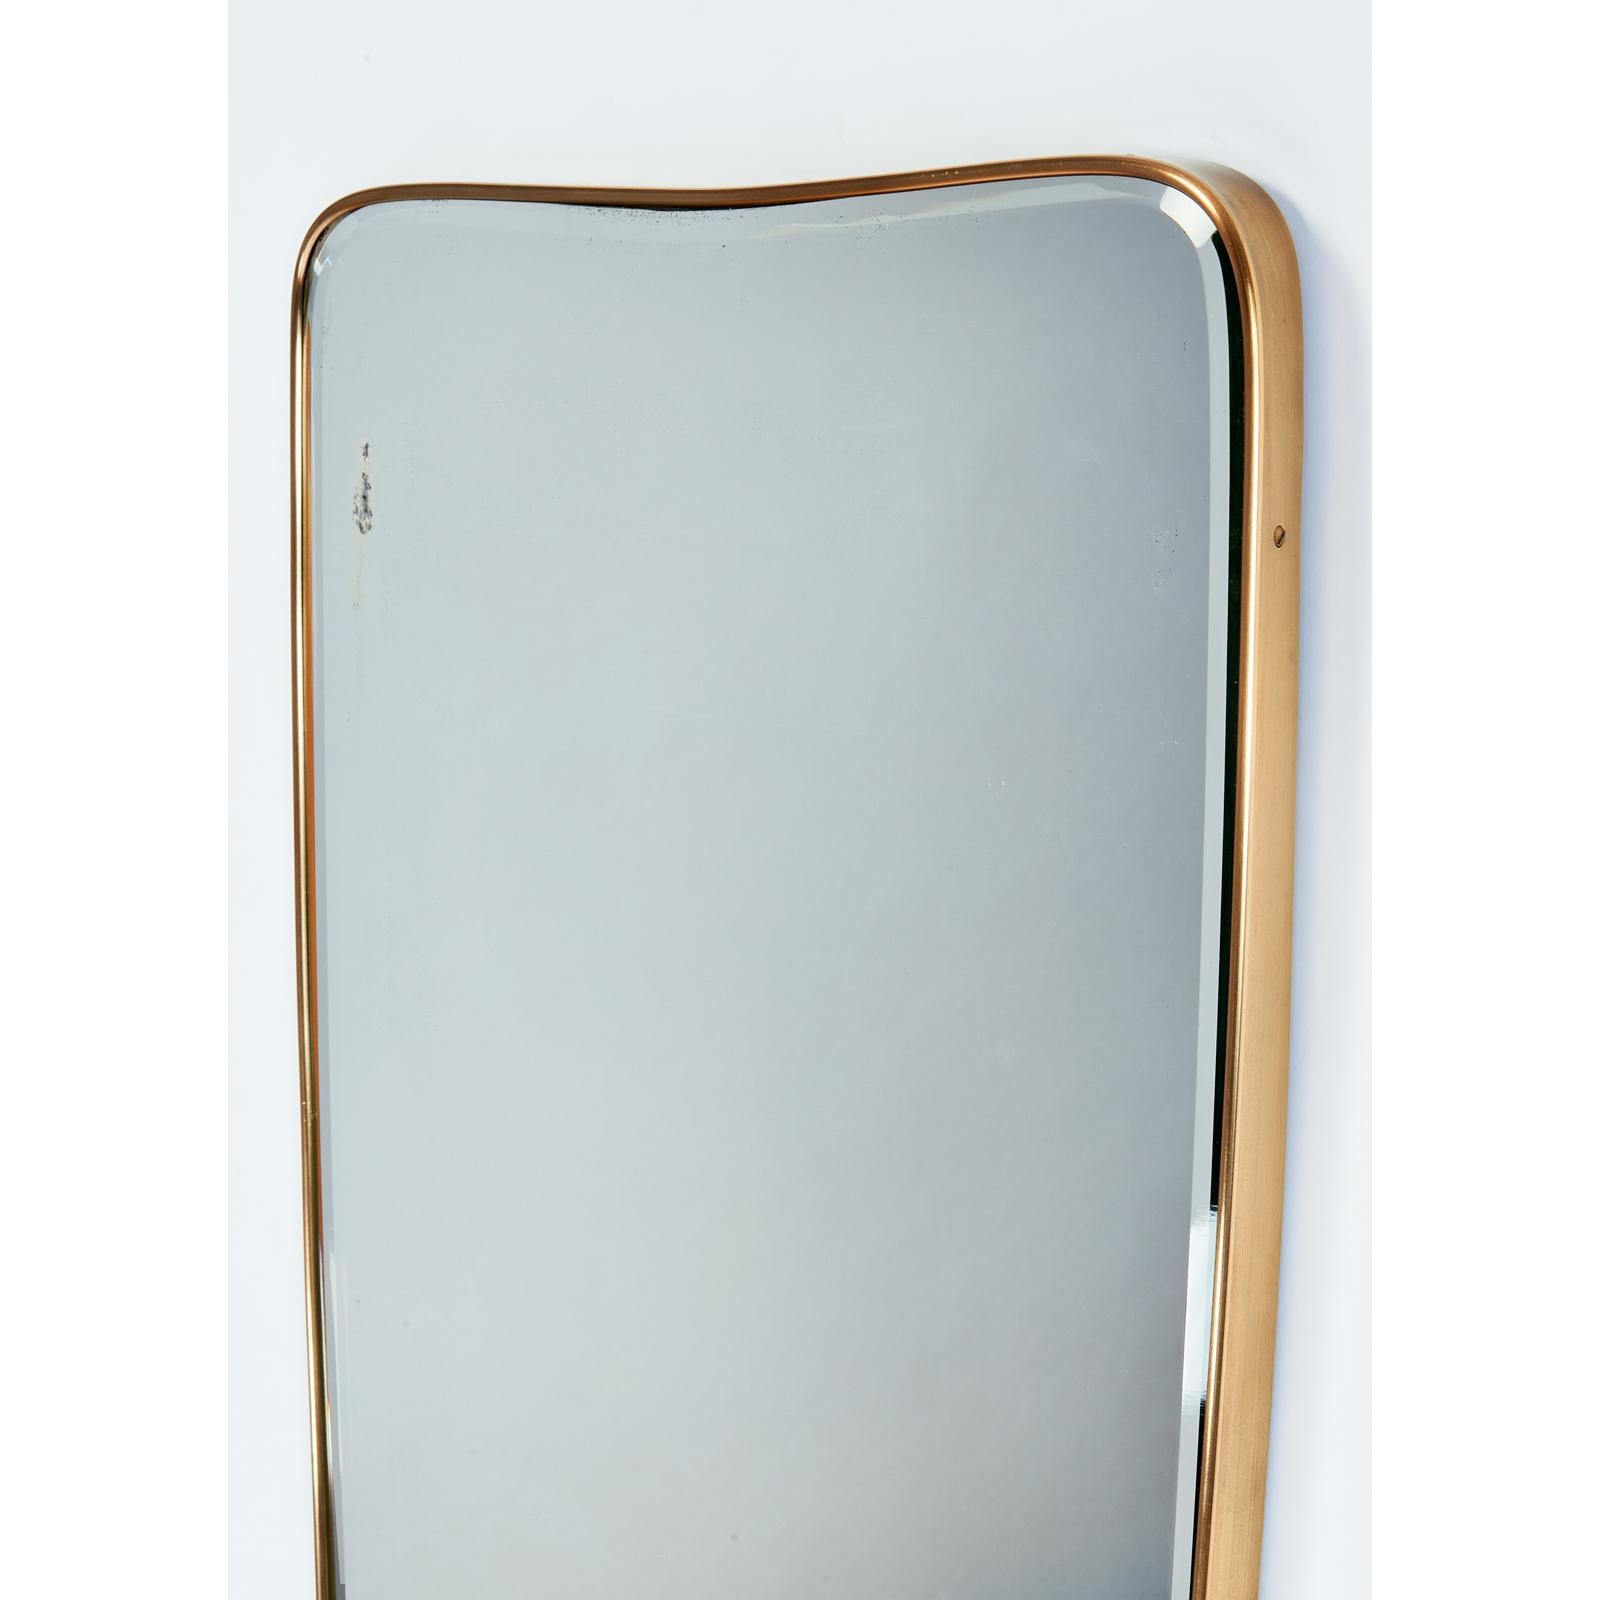 Italy, 1950's
Elegantly elongated shaped polished brass mirror, with beveled glass
Measures: 46 H x 21 W
Mirror has some silvering loss consistent with age, shown on photos.